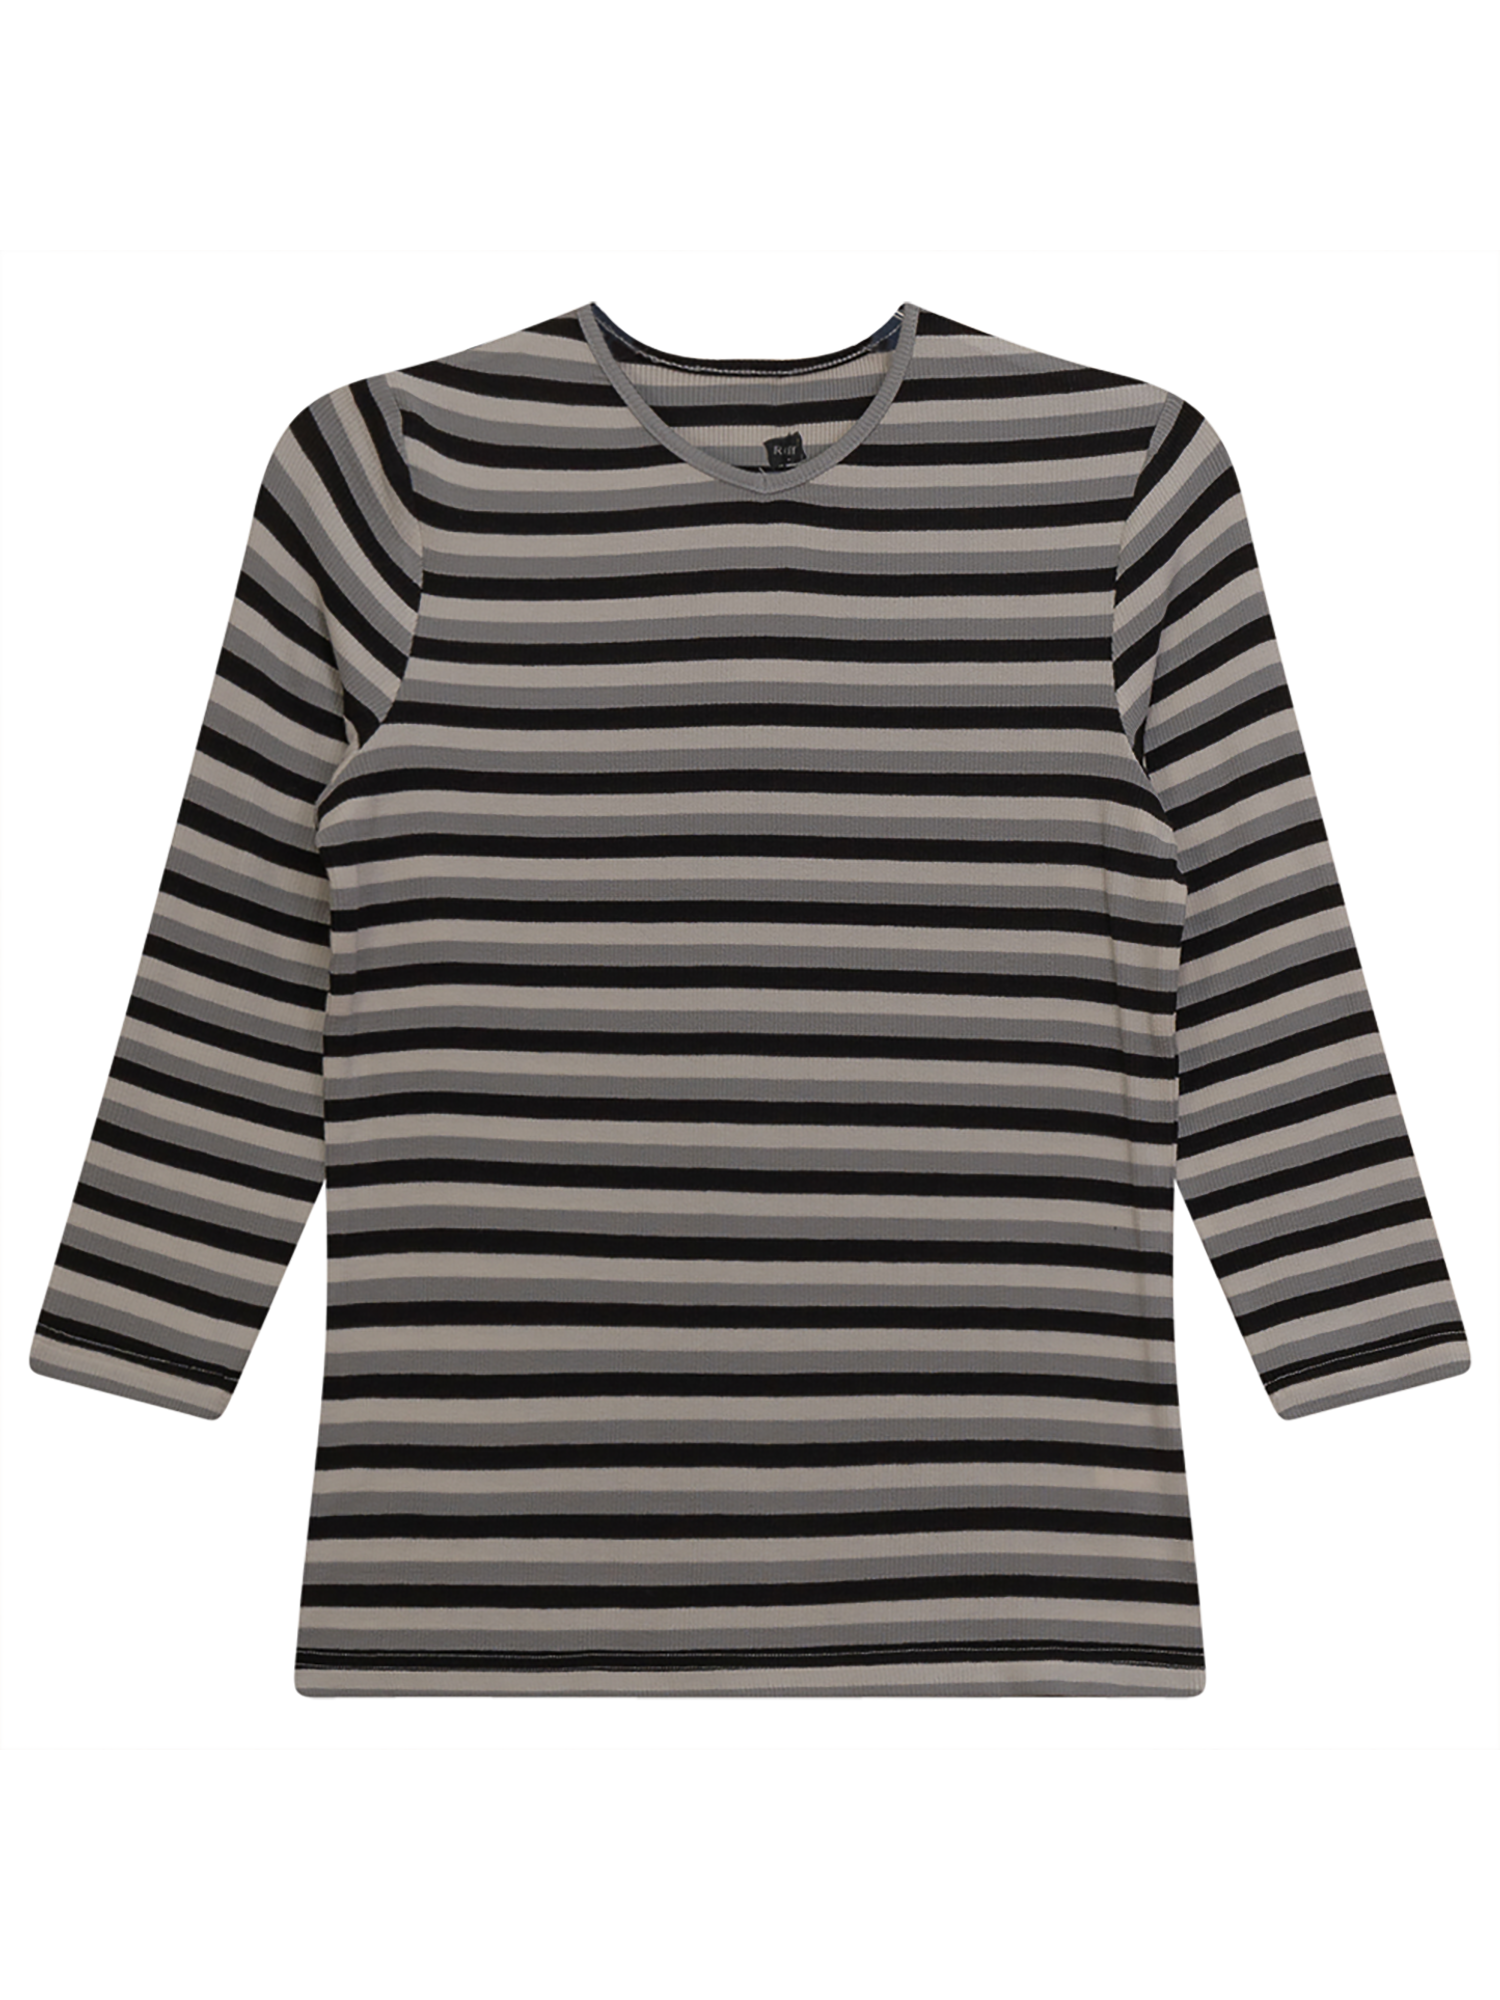 Riff Ribbed Striped 3/4 Sleeve V-Neck Tee - Shirts & Tops